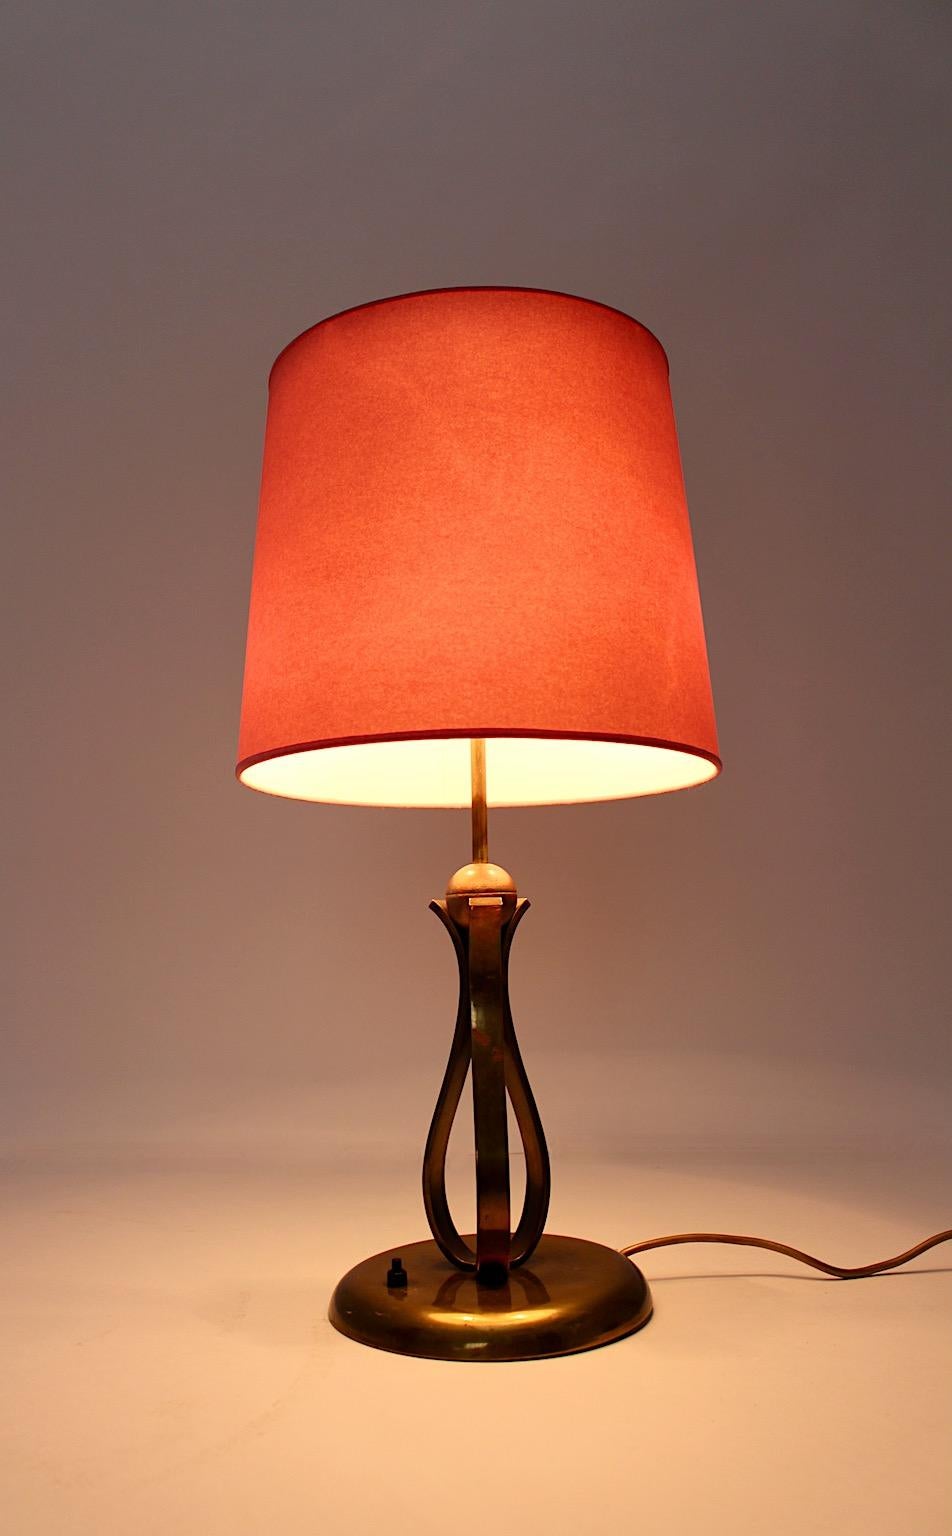 vintage table lamps 1930s